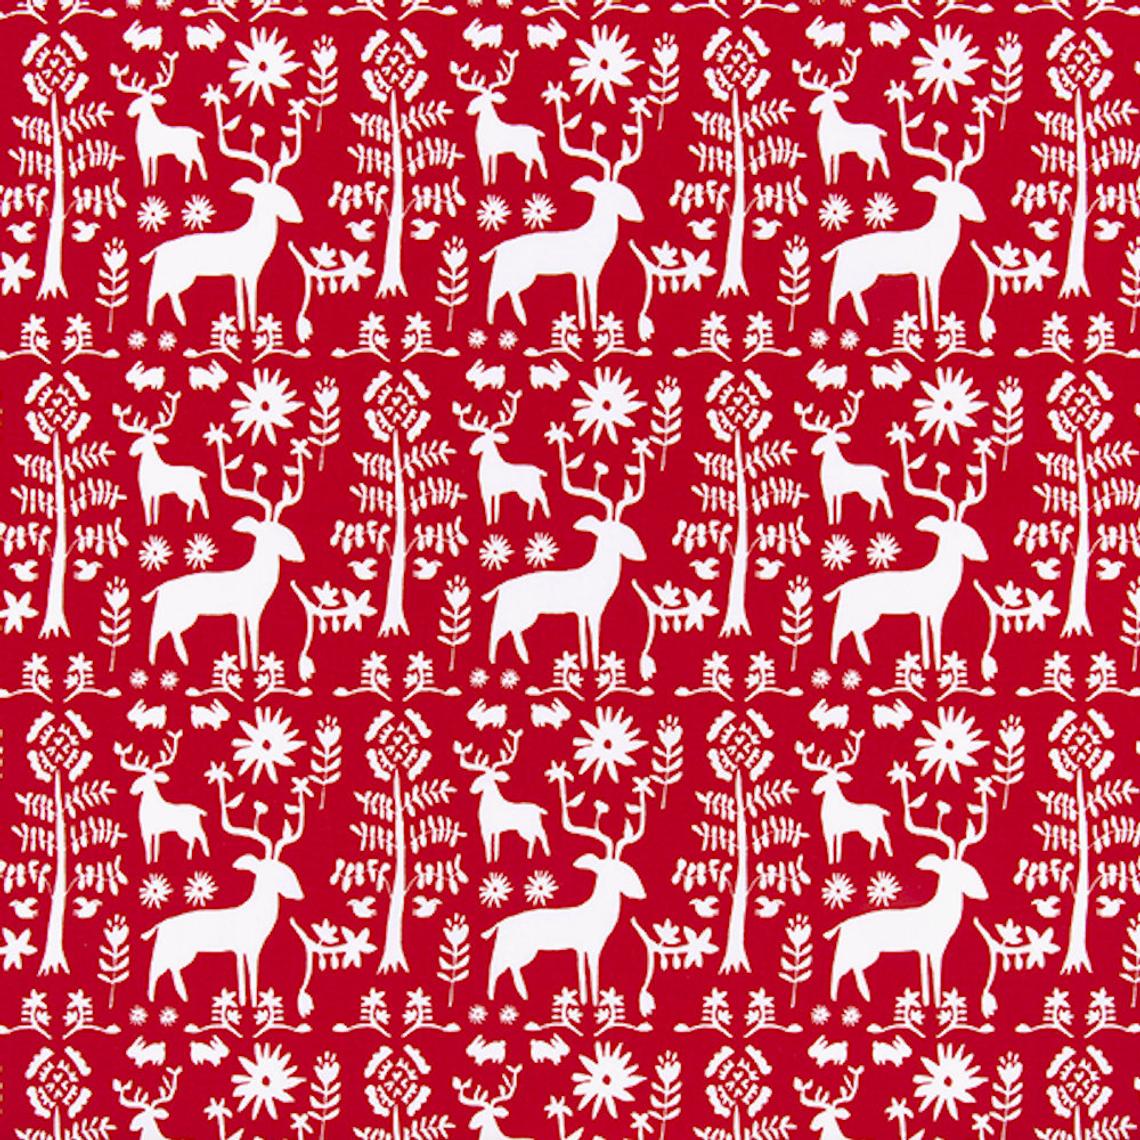 duvet cover in promise land forest lipstick red